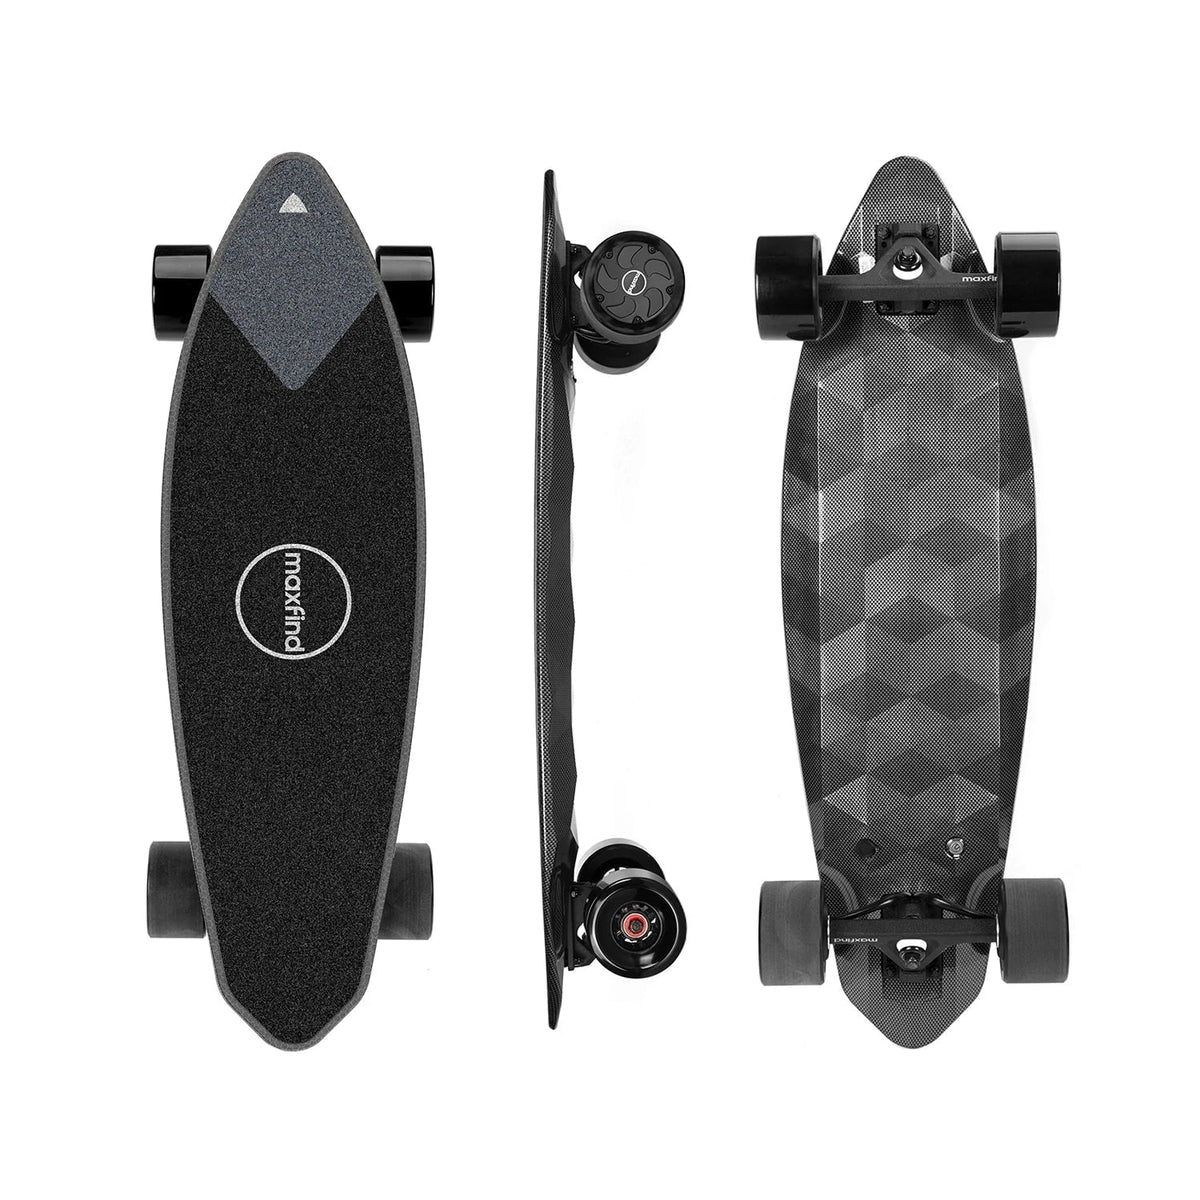 MAX2 PRO Electric Skateboard - up to 21 Mile Range, 24 mph max speed, 28%  hill climbing